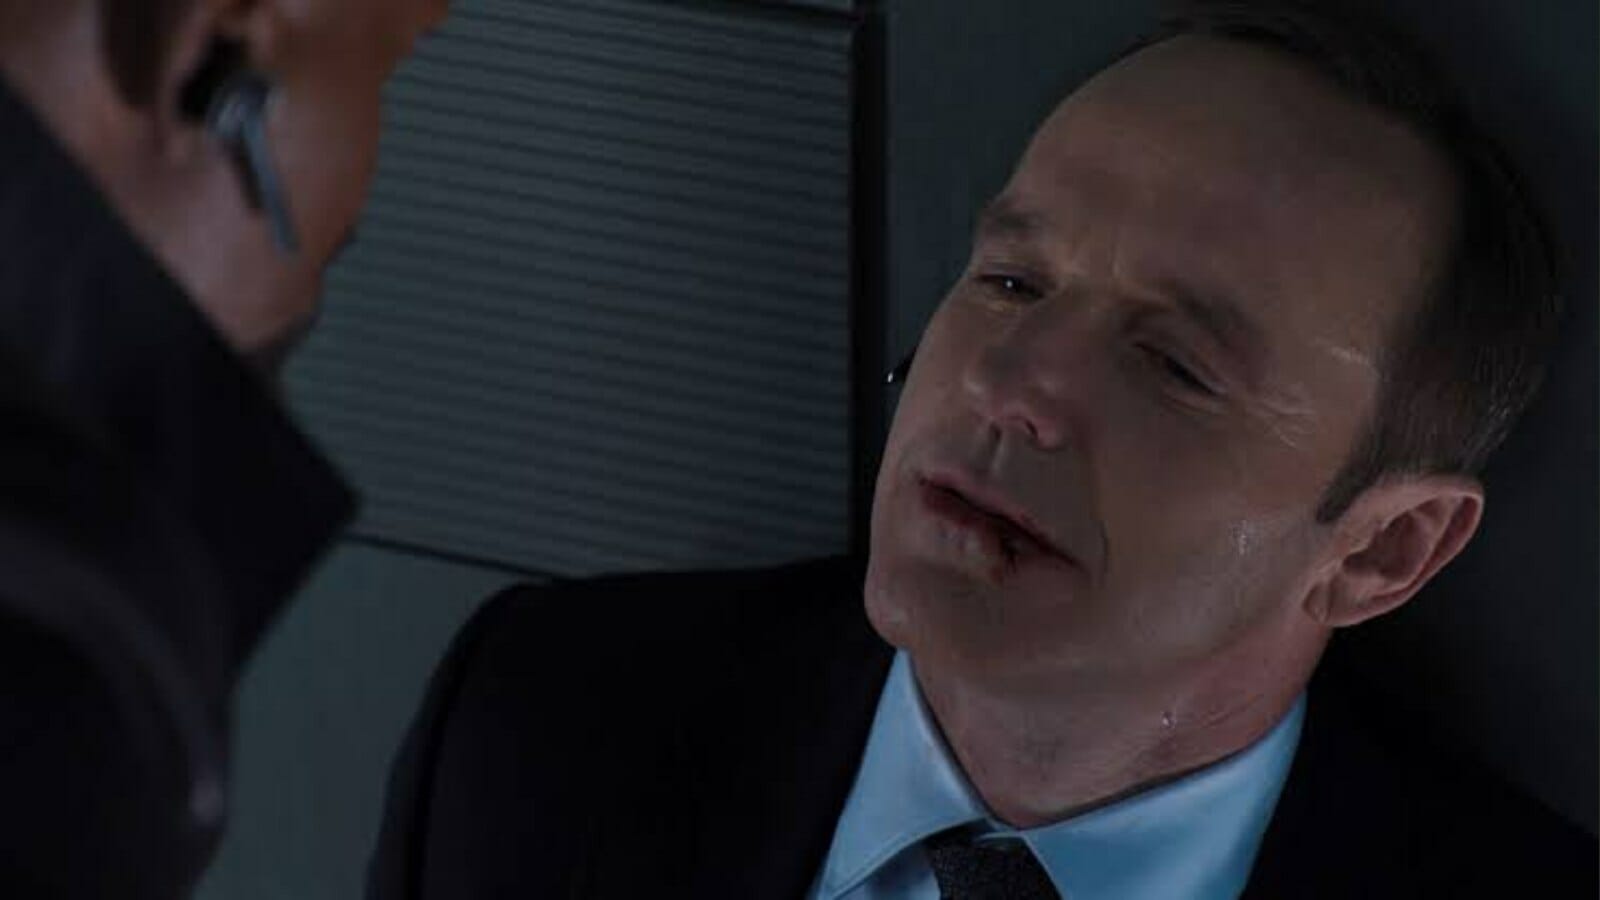 Coulson in his last moments